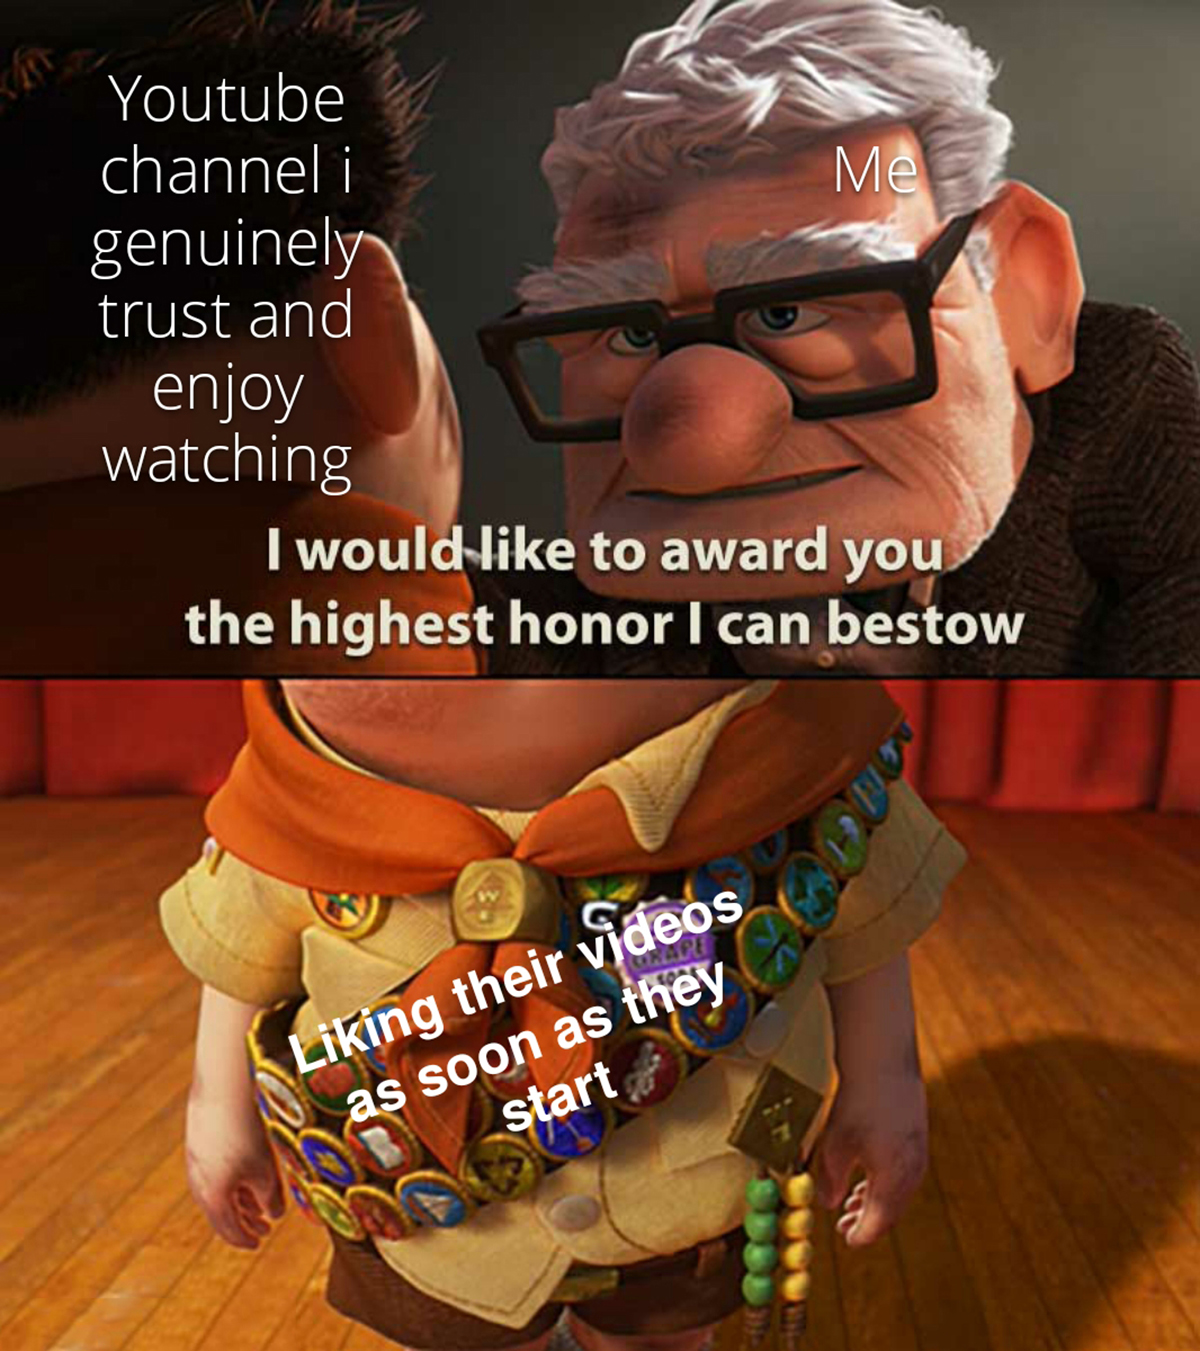 scouts honor meme - Youtube channel i genuinely trust and enjoy watching Me I would to award you the highest honor I can bestow Liking their videos as soon as they start